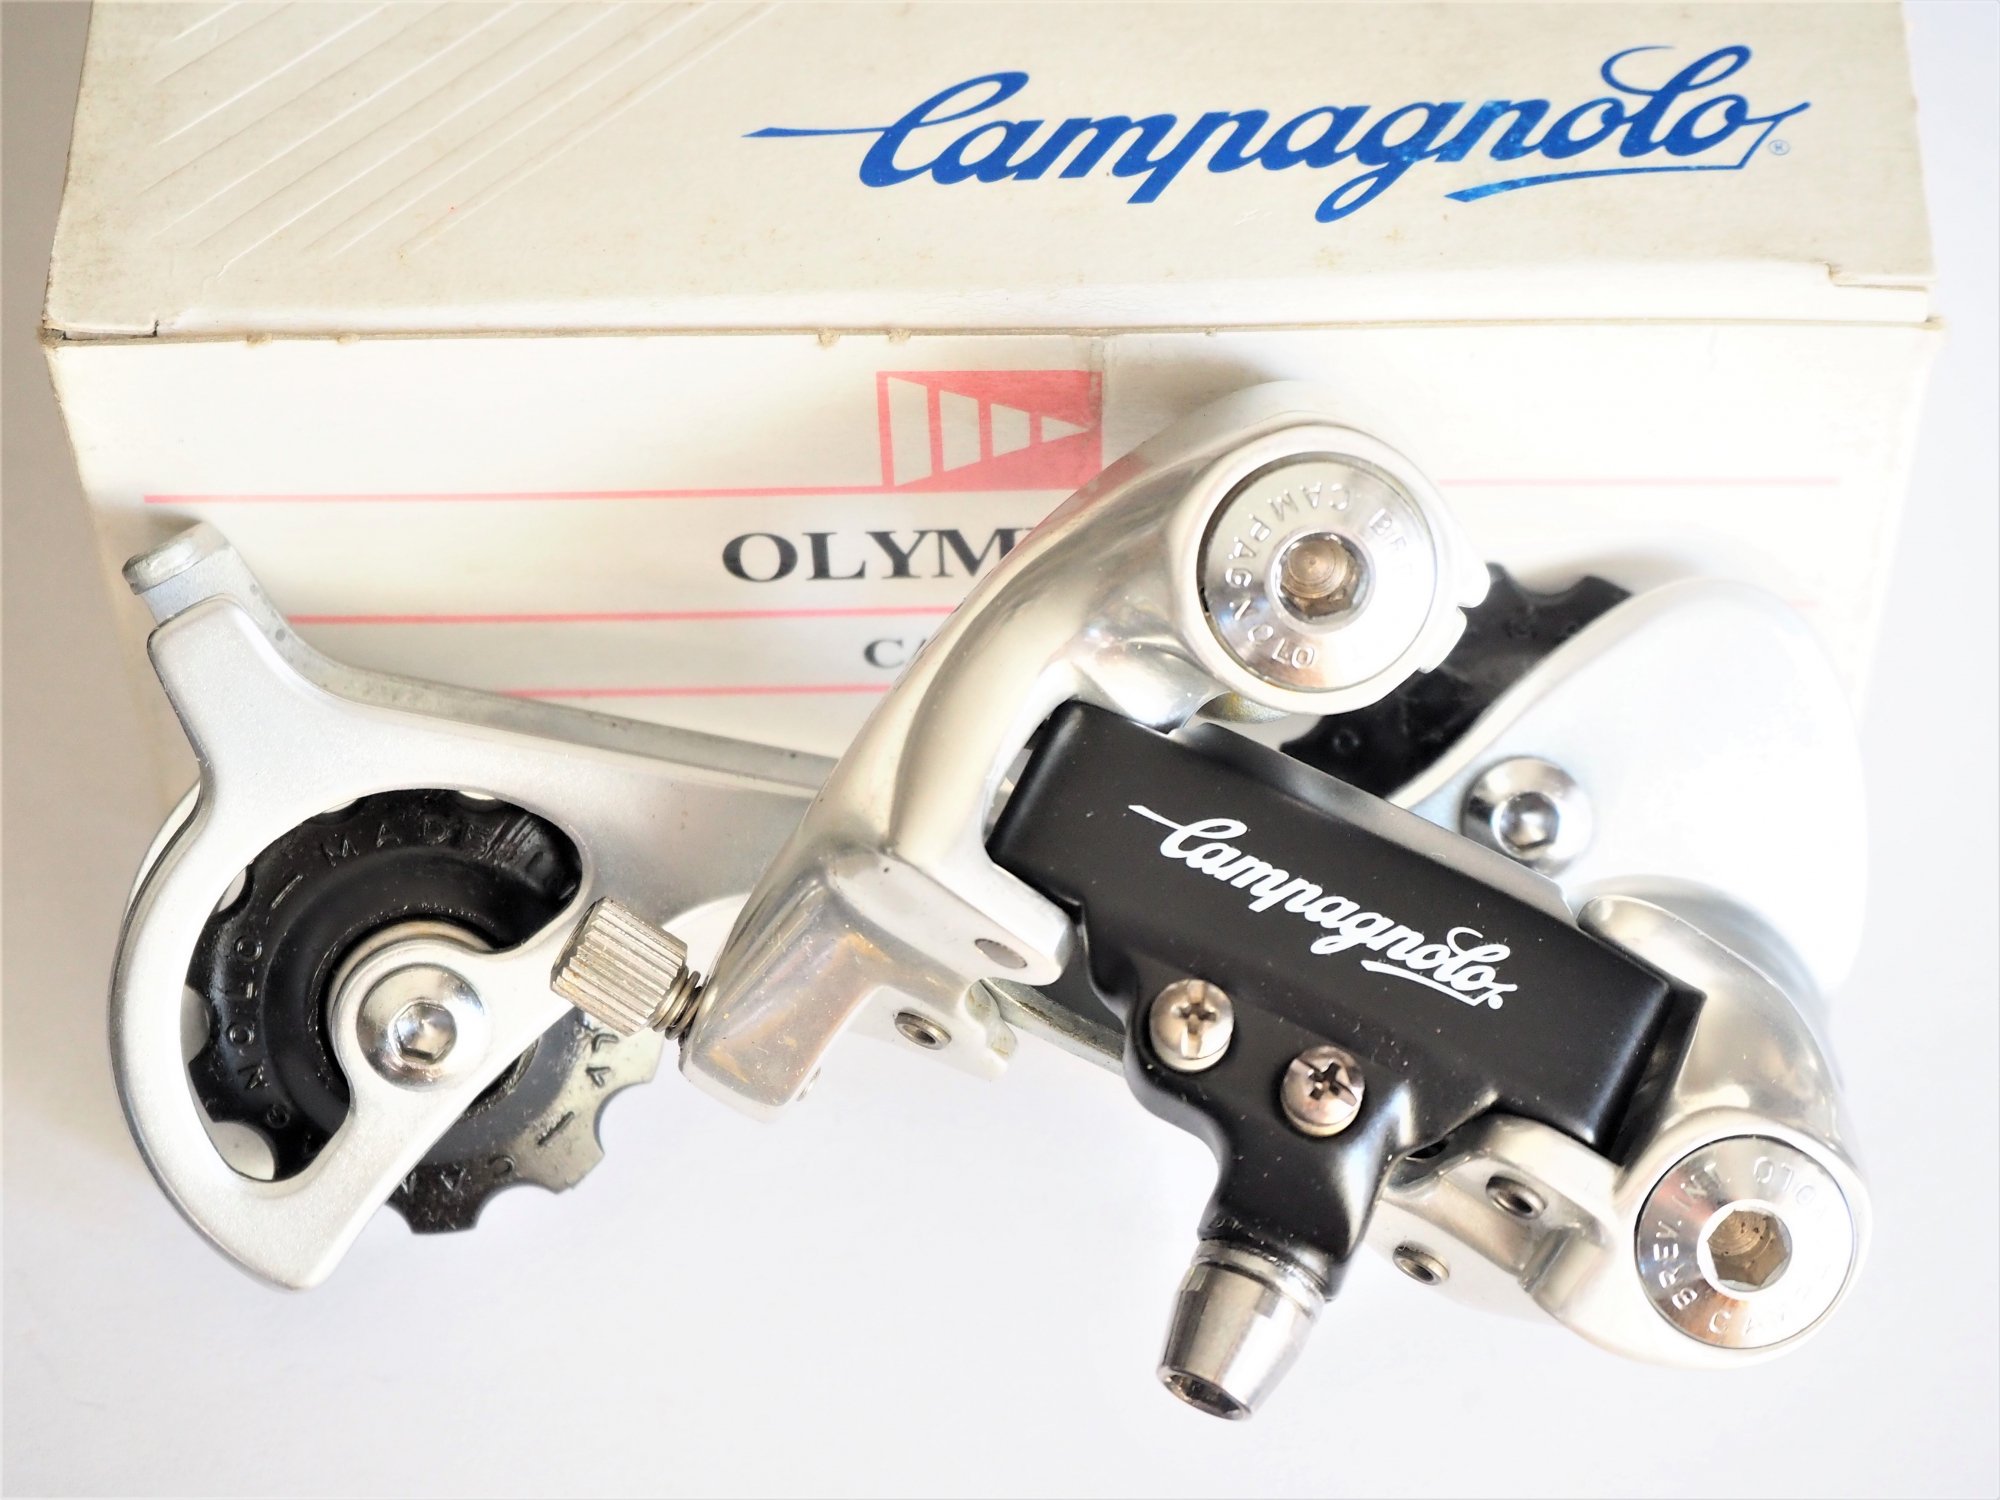 <img class='new_mark_img1' src='https://img.shop-pro.jp/img/new/icons14.gif' style='border:none;display:inline;margin:0px;padding:0px;width:auto;' />CAMPAGNOLO OLYMPUS 